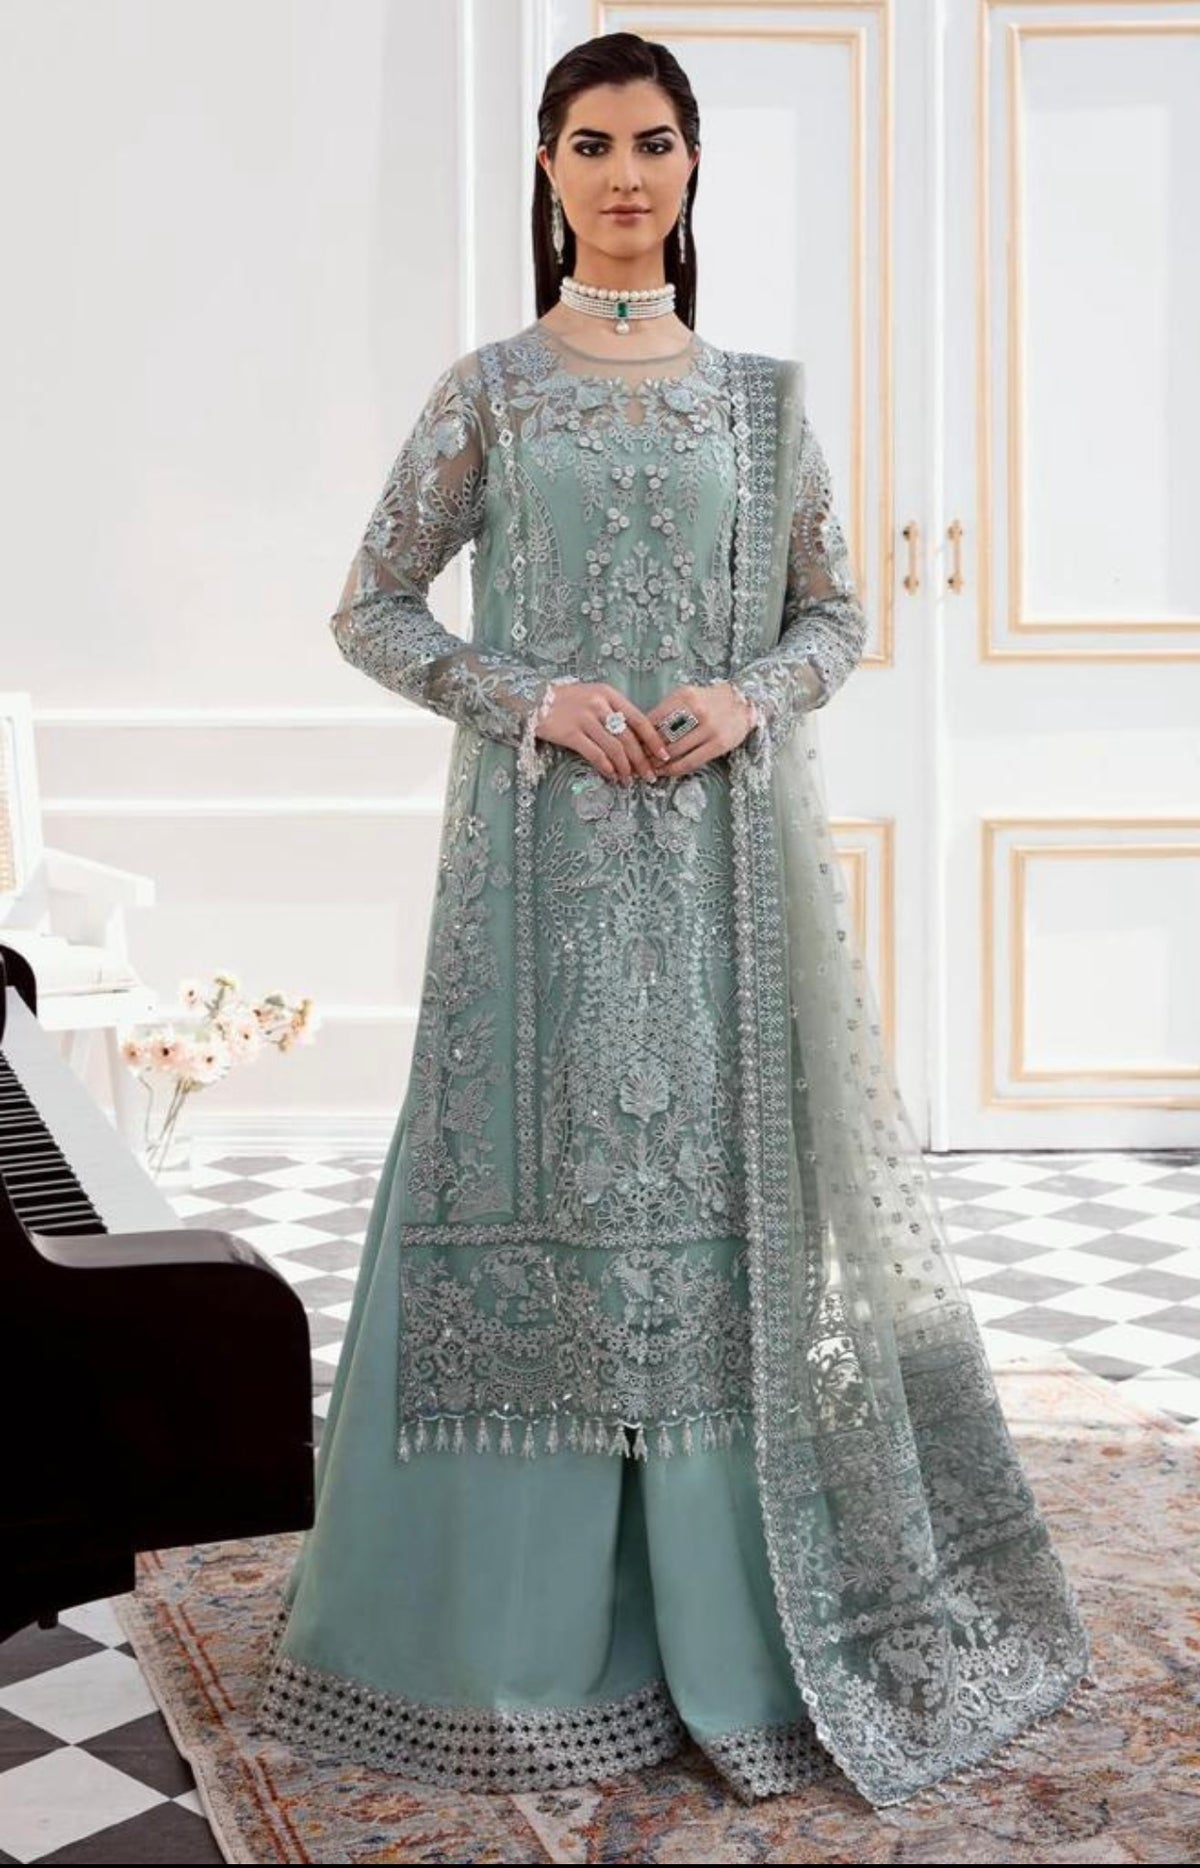 MB INSPIRED BY SIMRANS EMBROIDERED CHIFFON READYMADE MBCR:308